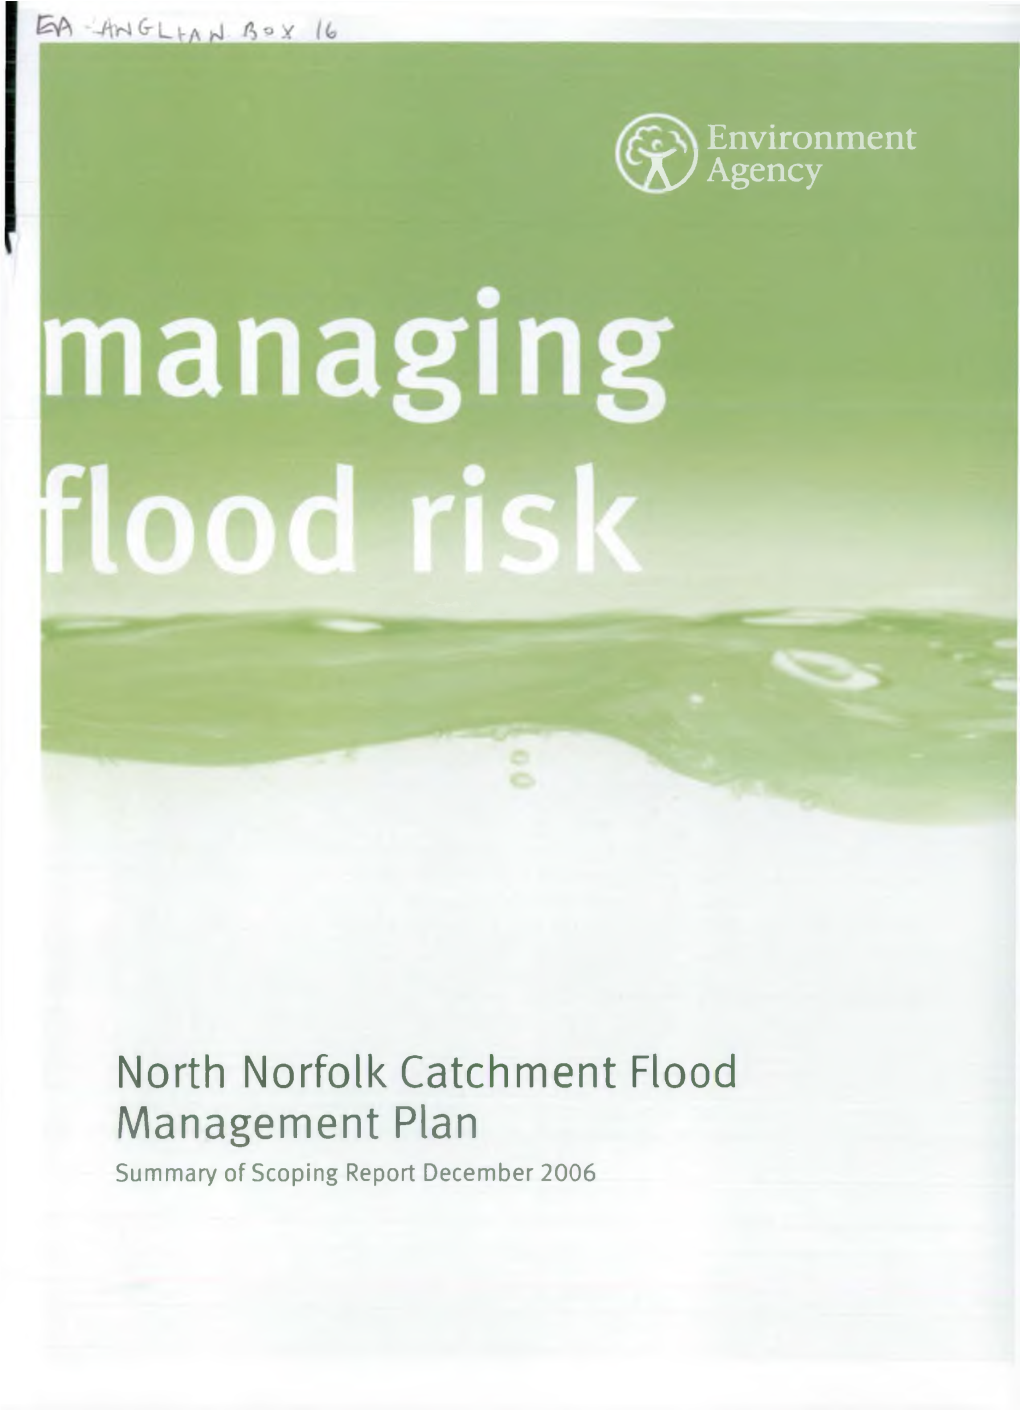 North Norfolk Catchment Flood Management Plan Summary of Scoping Report December 2006 We Are the Environment Agency